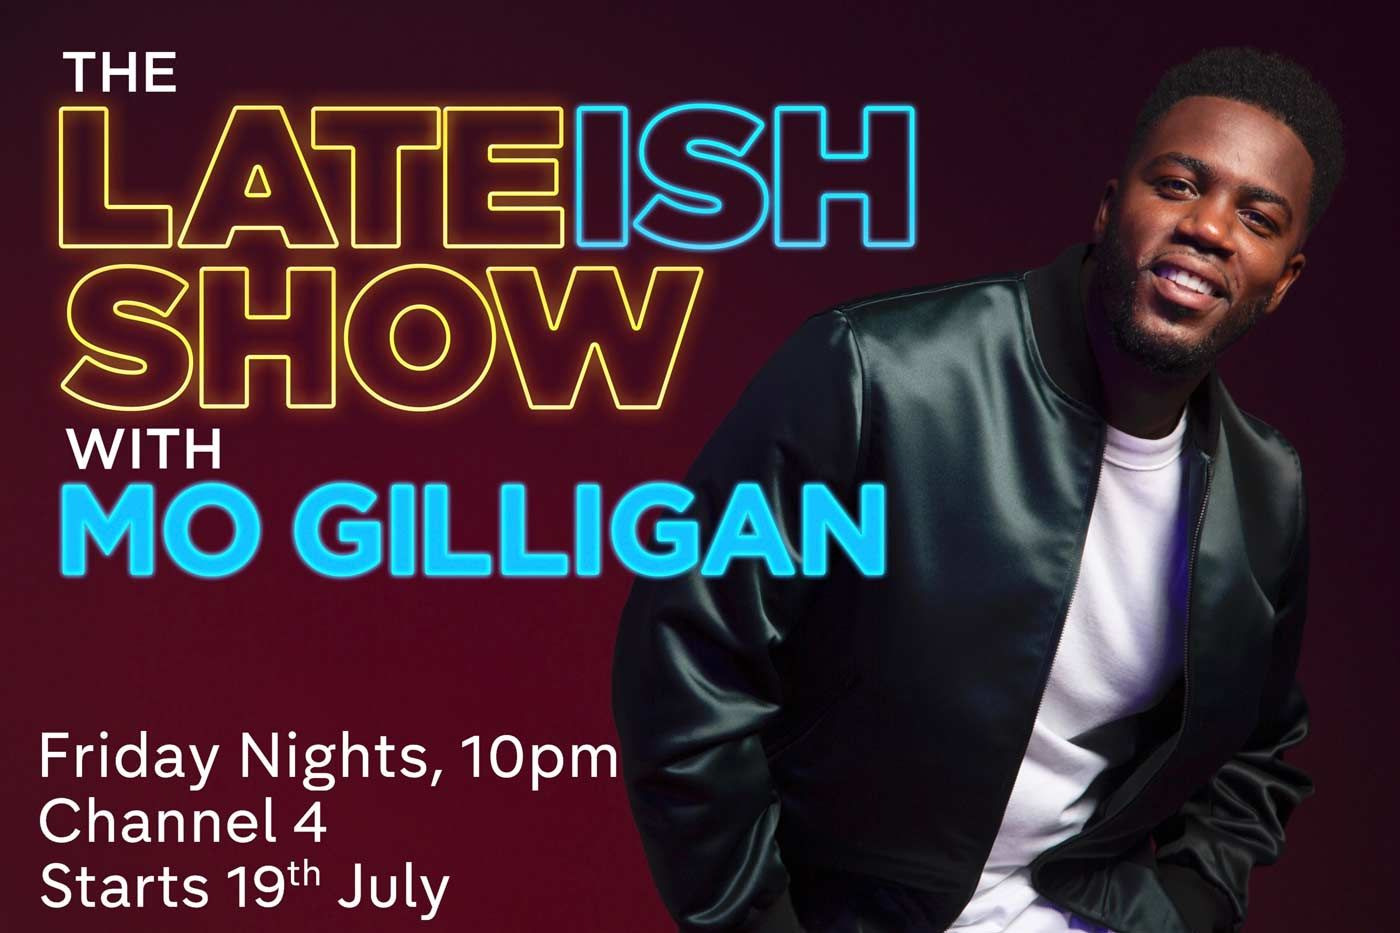 Show The Lateish Show with Mo Gilligan